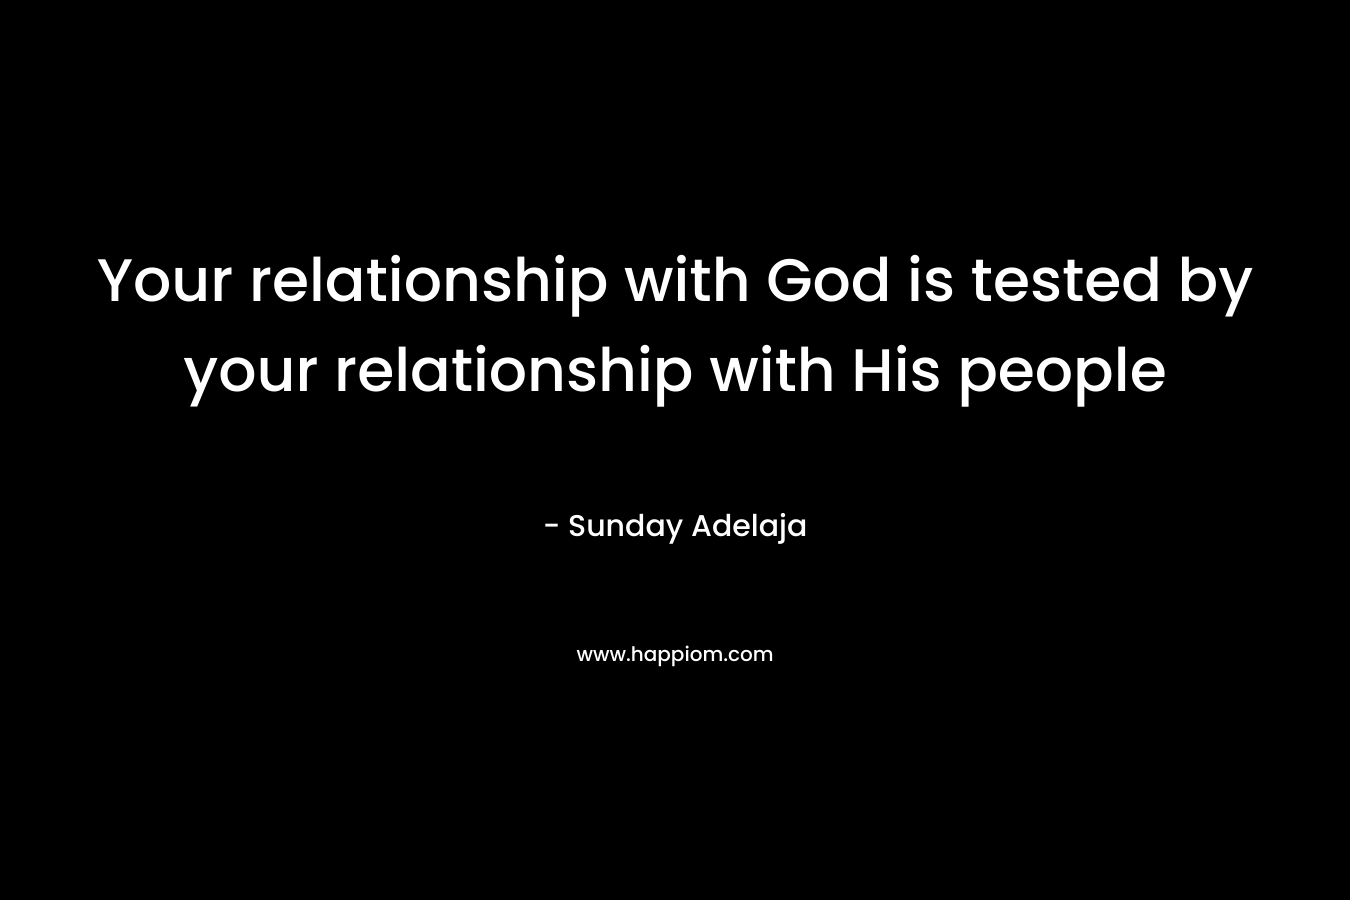 Your relationship with God is tested by your relationship with His people